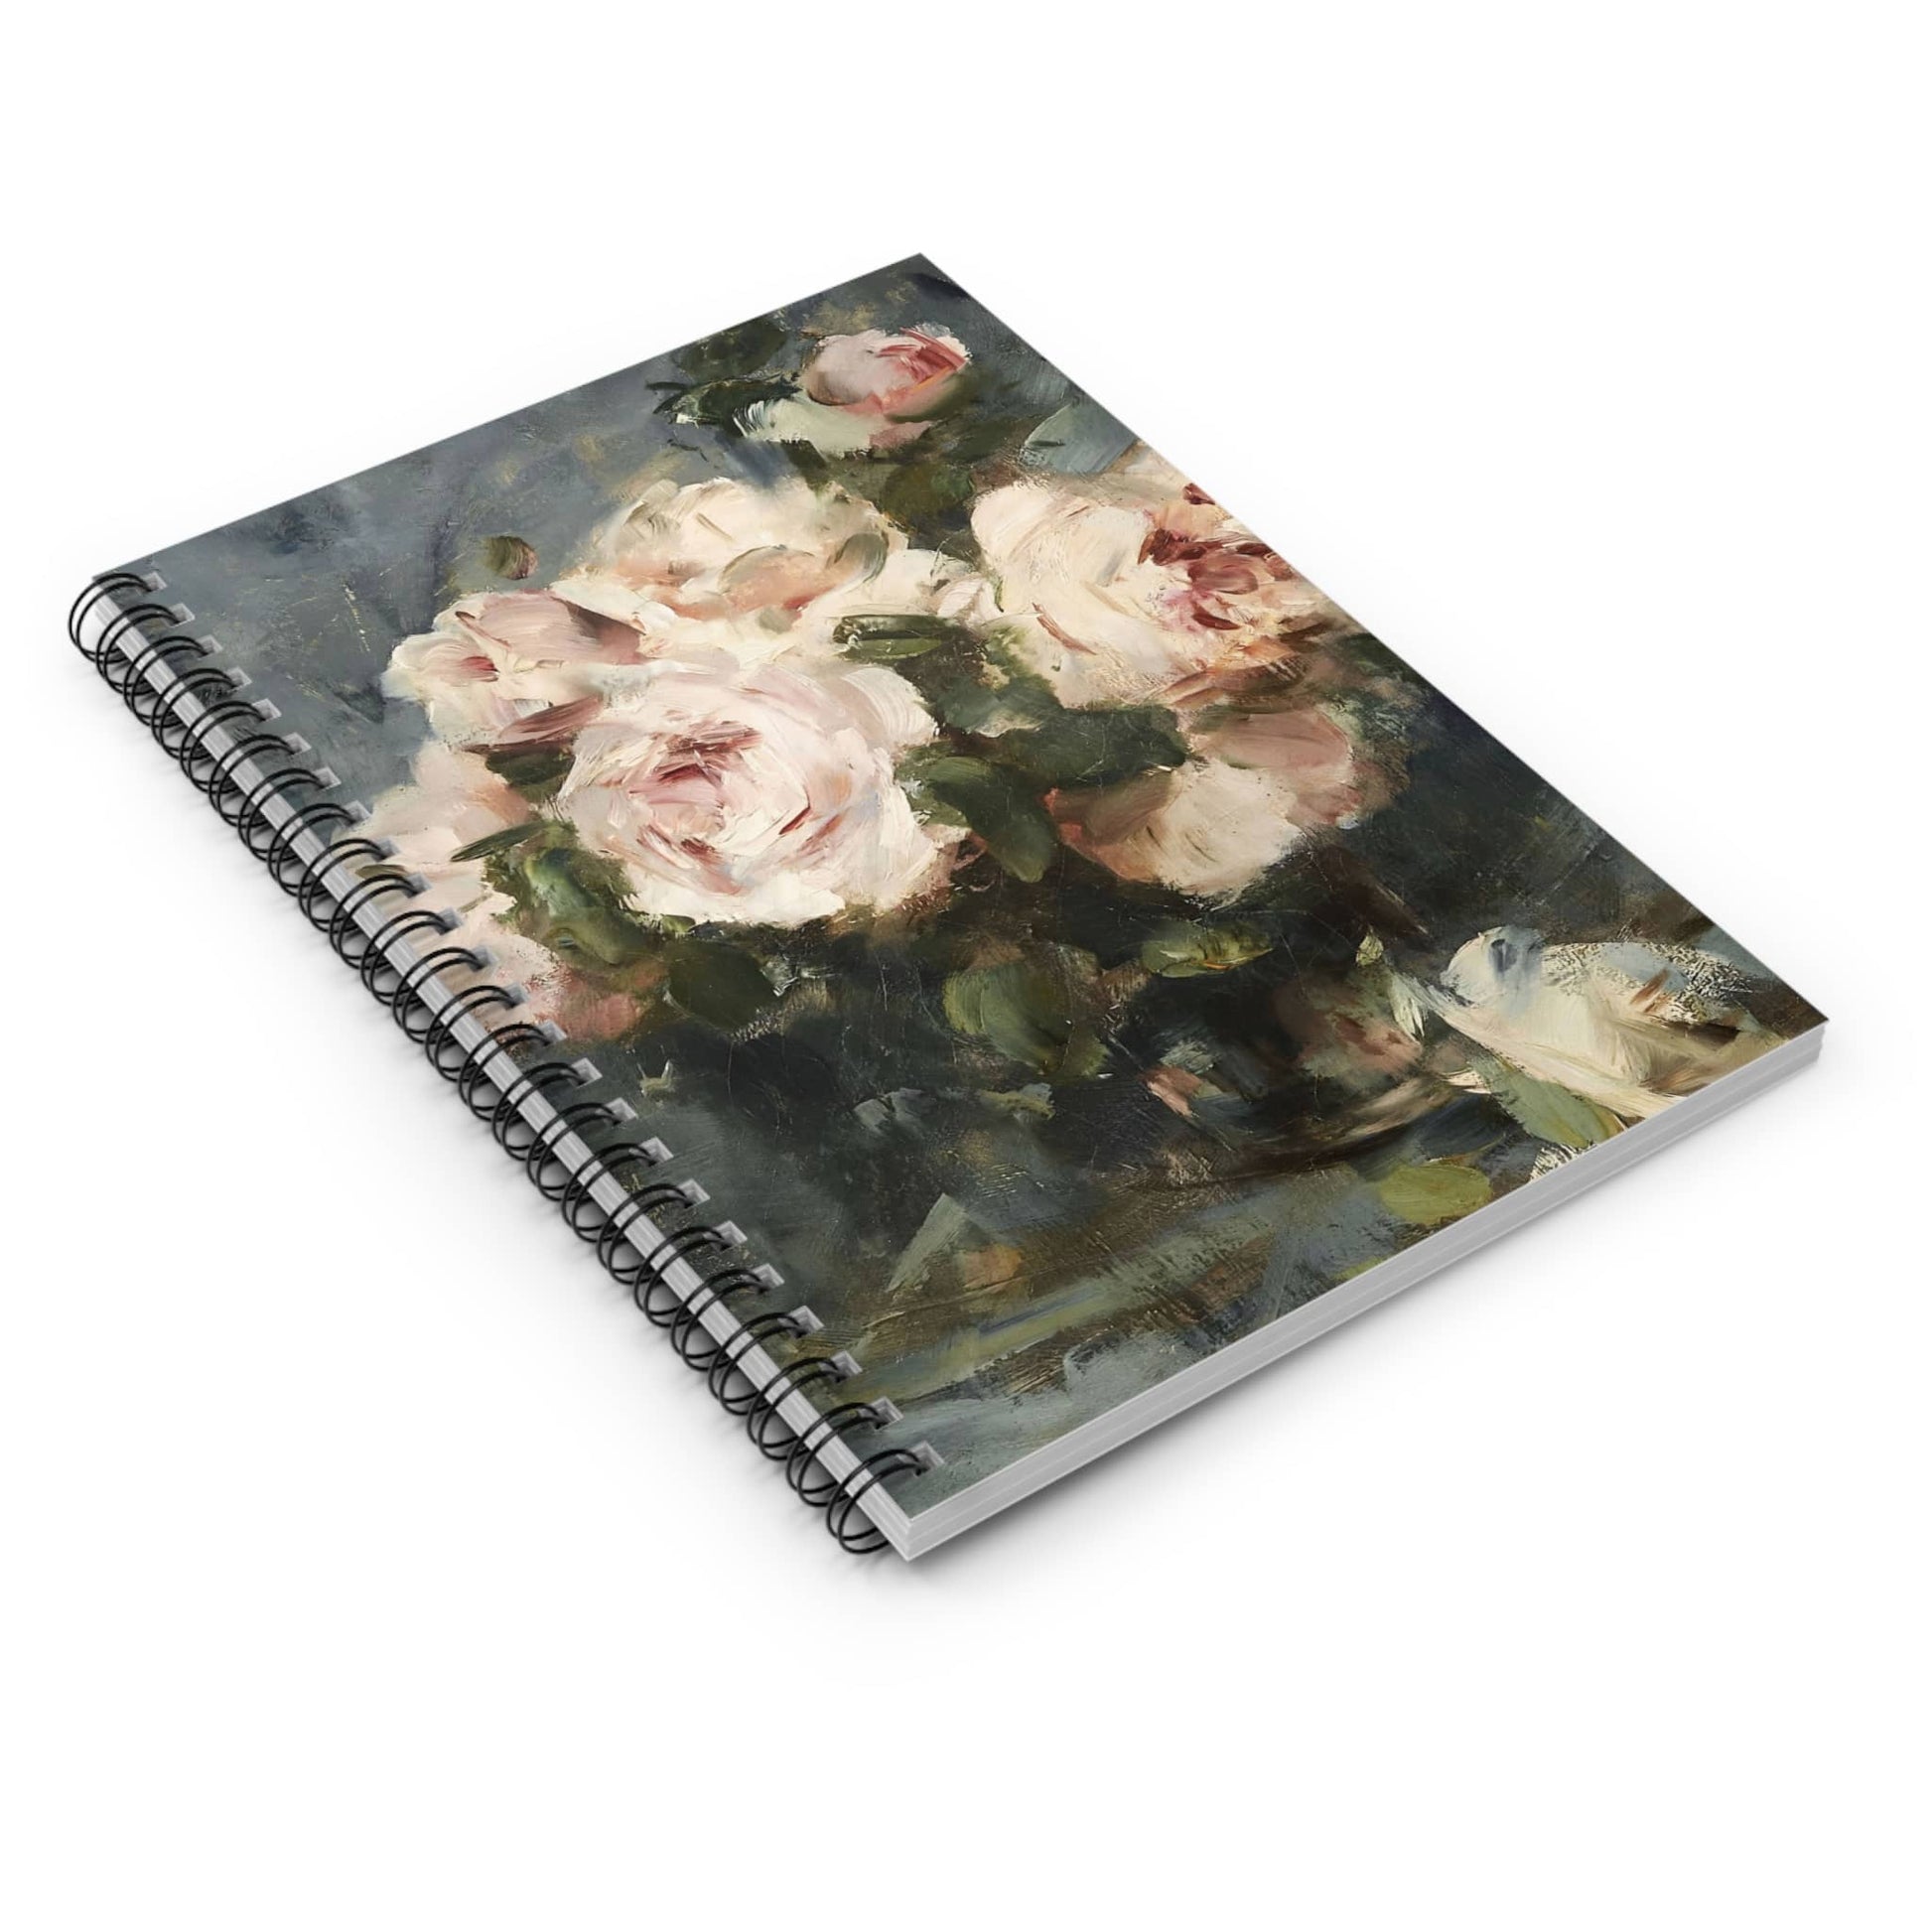 Abstract Flower Spiral Notebook Laying Flat on White Surface